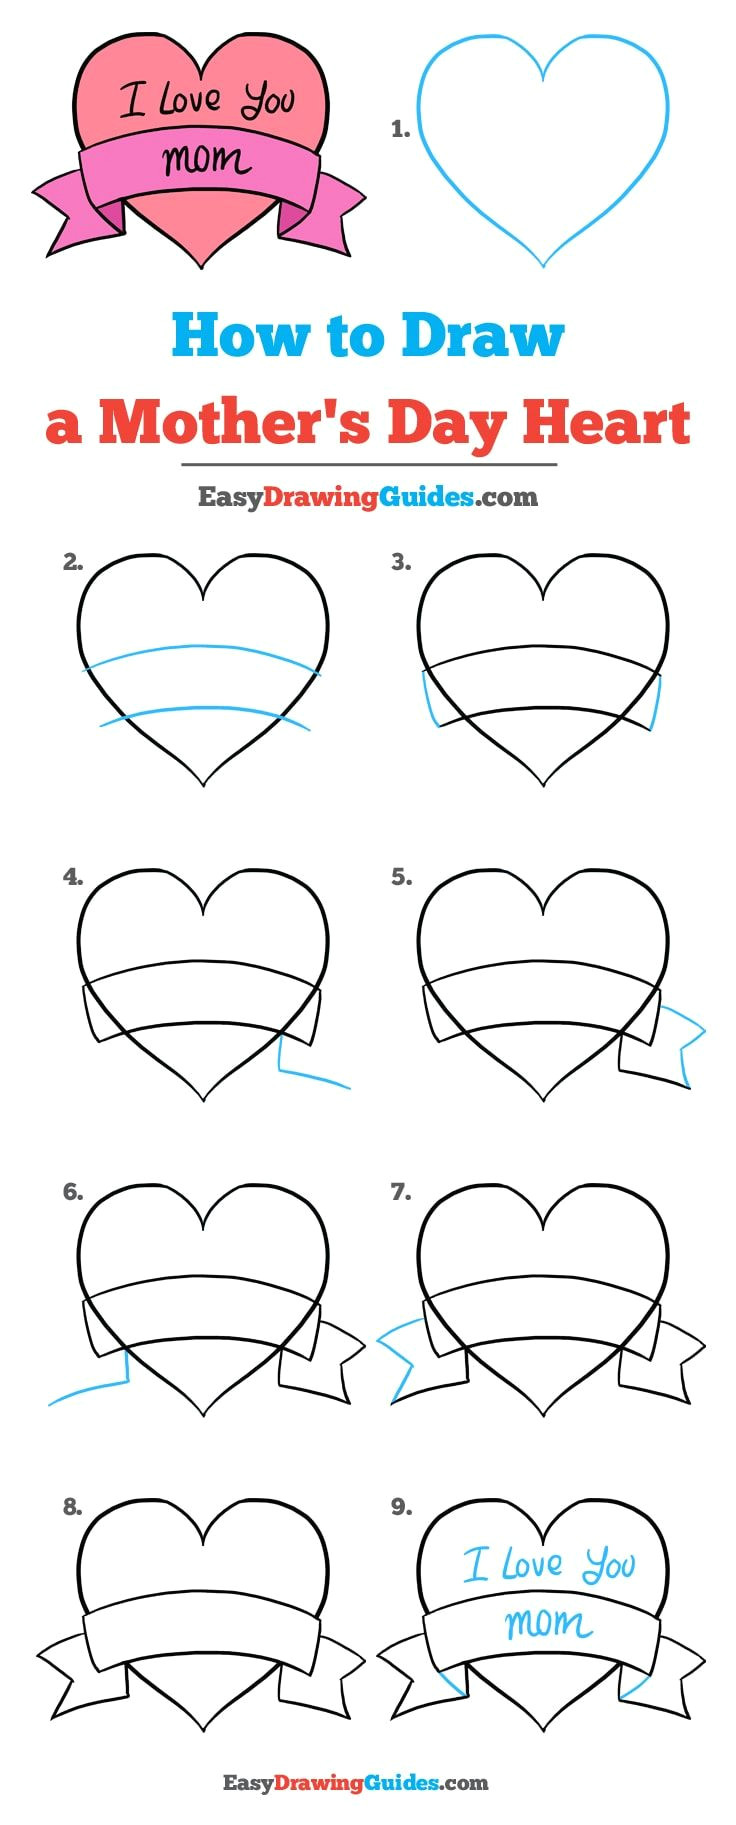 Easy Drawings Lessons How to Draw A Mother S Day Heart Really Easy Drawing Tutorial